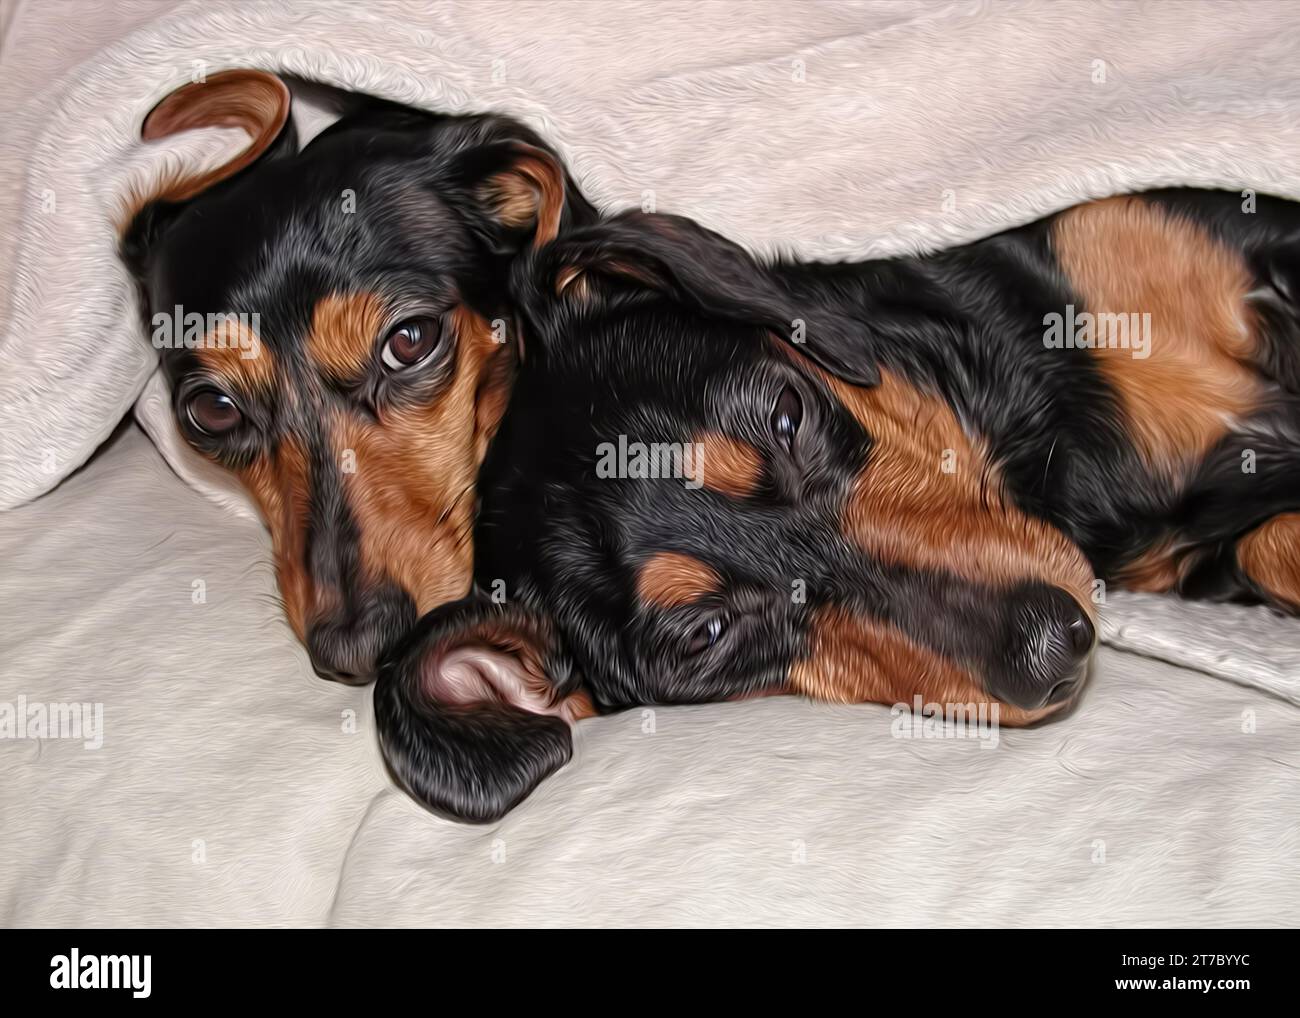 Digital Oil Painting of two short haired black and tan dachshund dogs on blanket Stock Photo